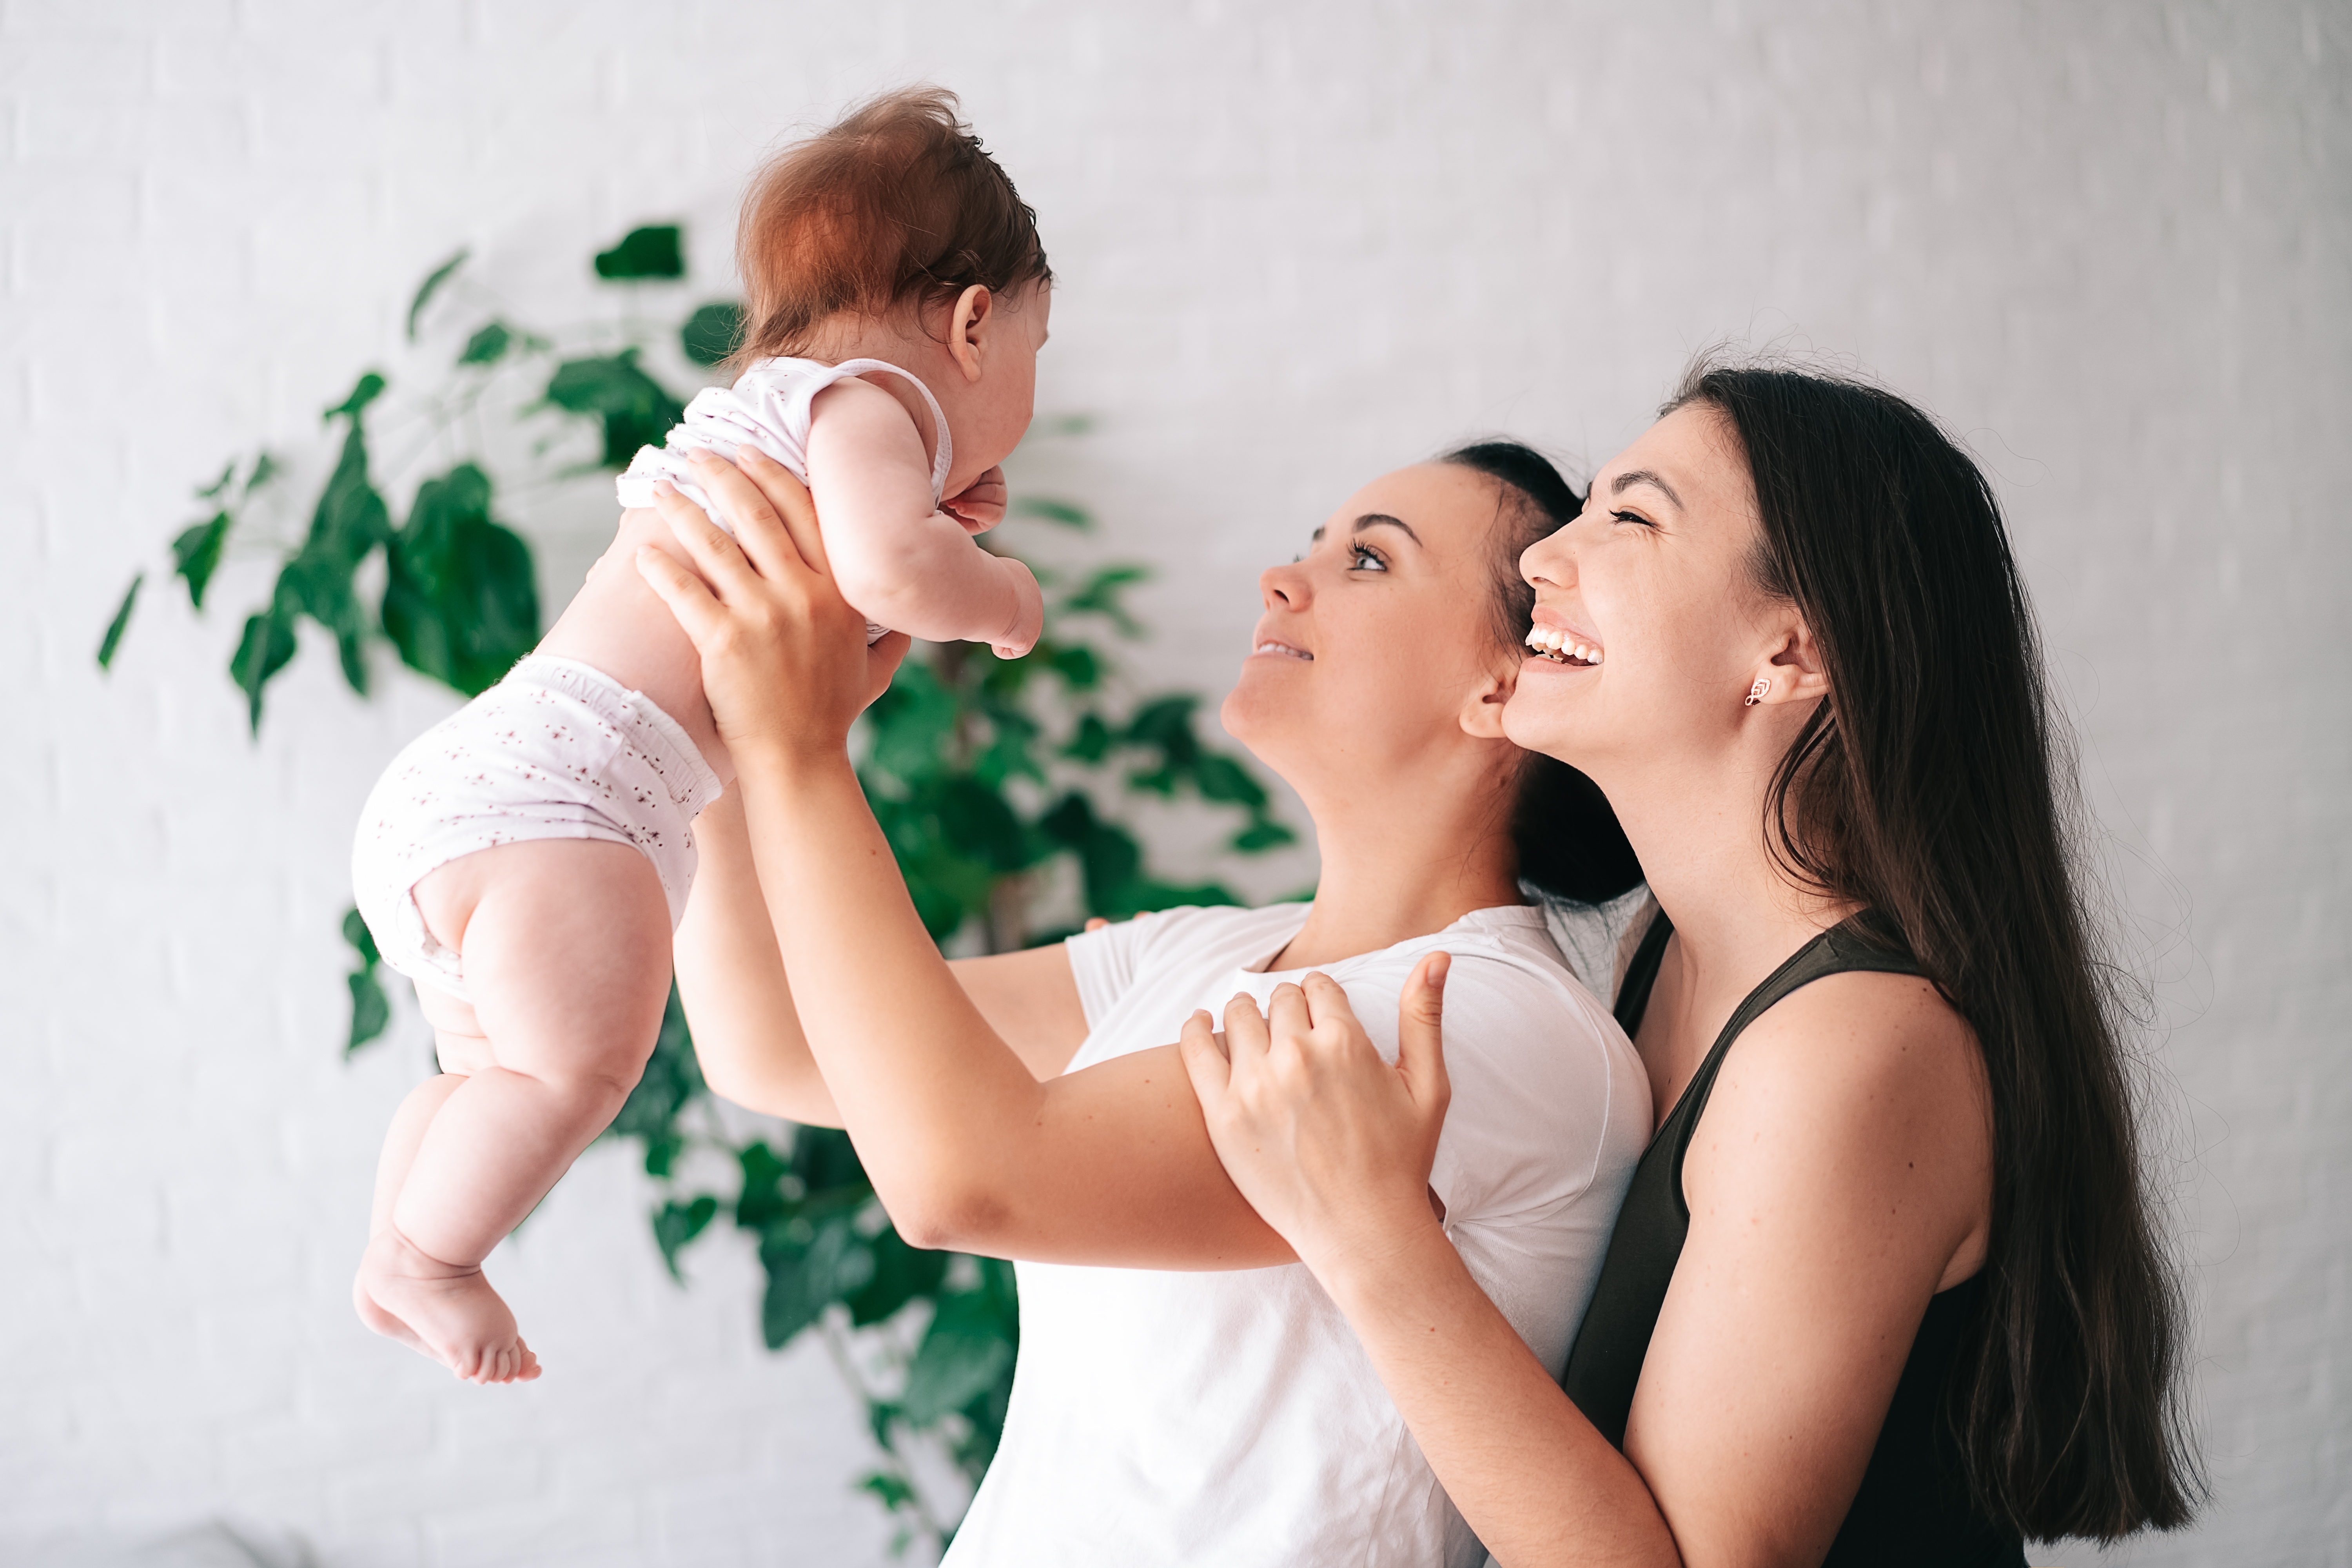 Two mothers with their baby, same sex relationship